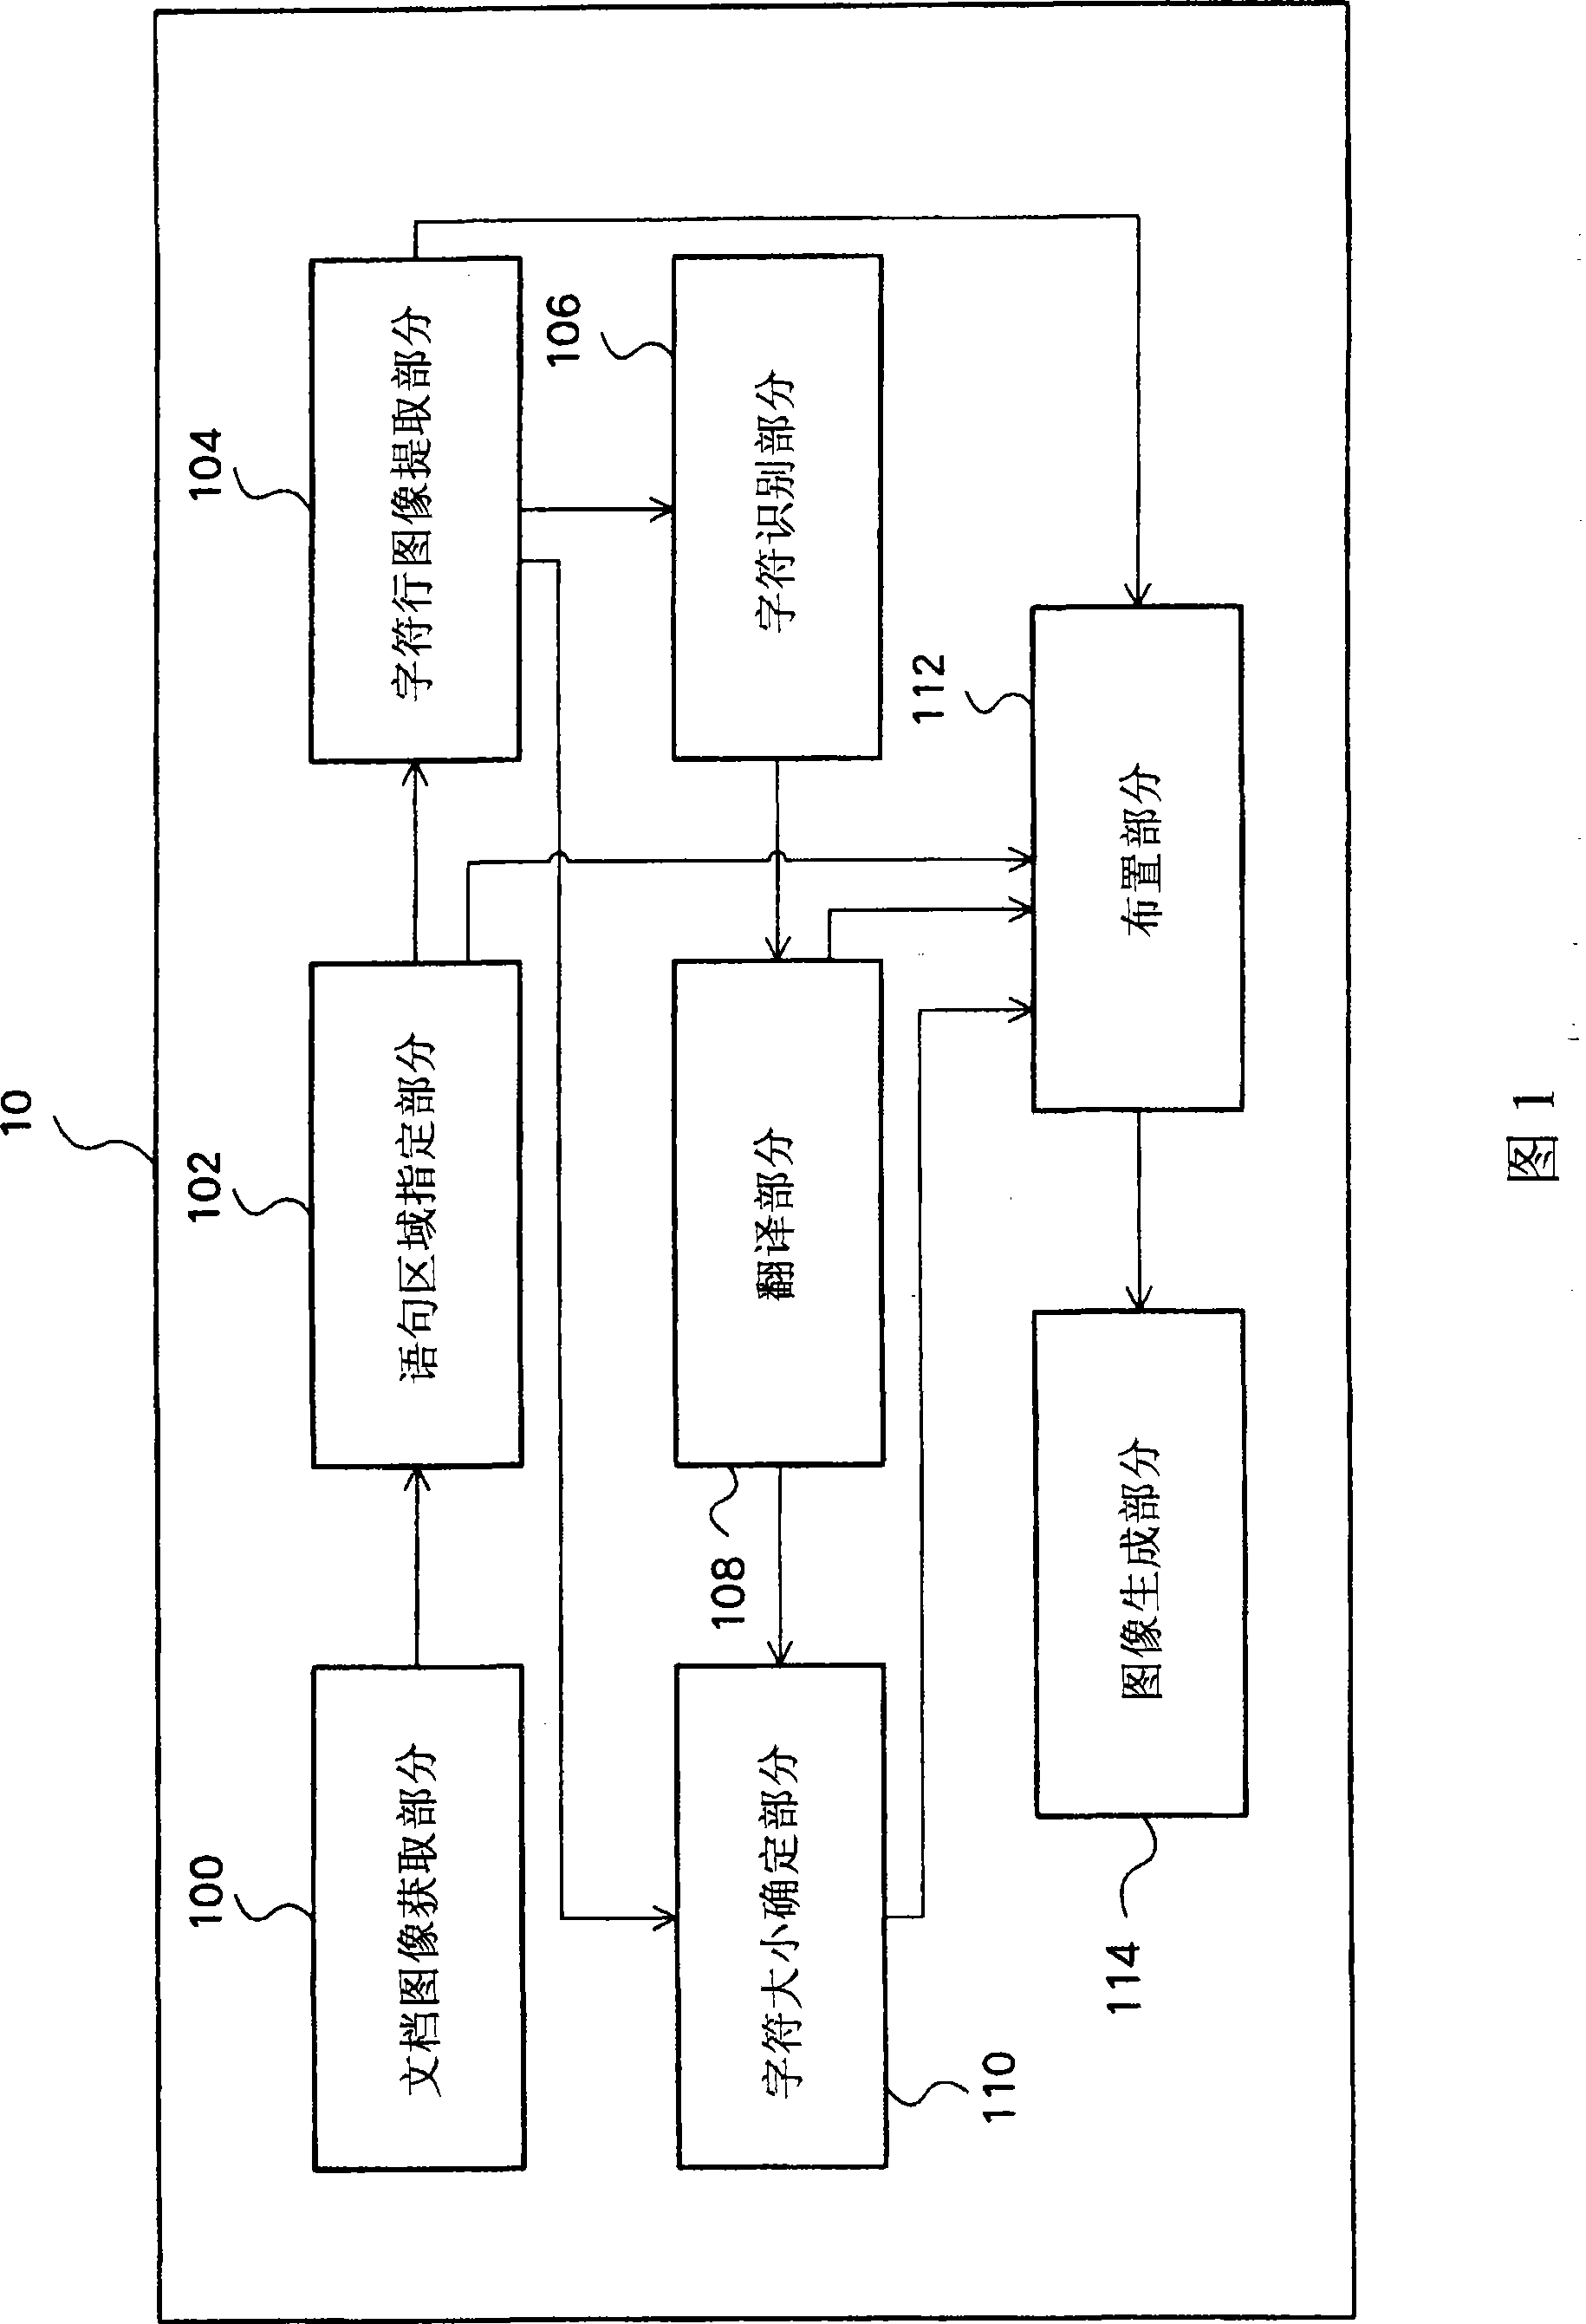 Document image processing apparatus, and information processing method